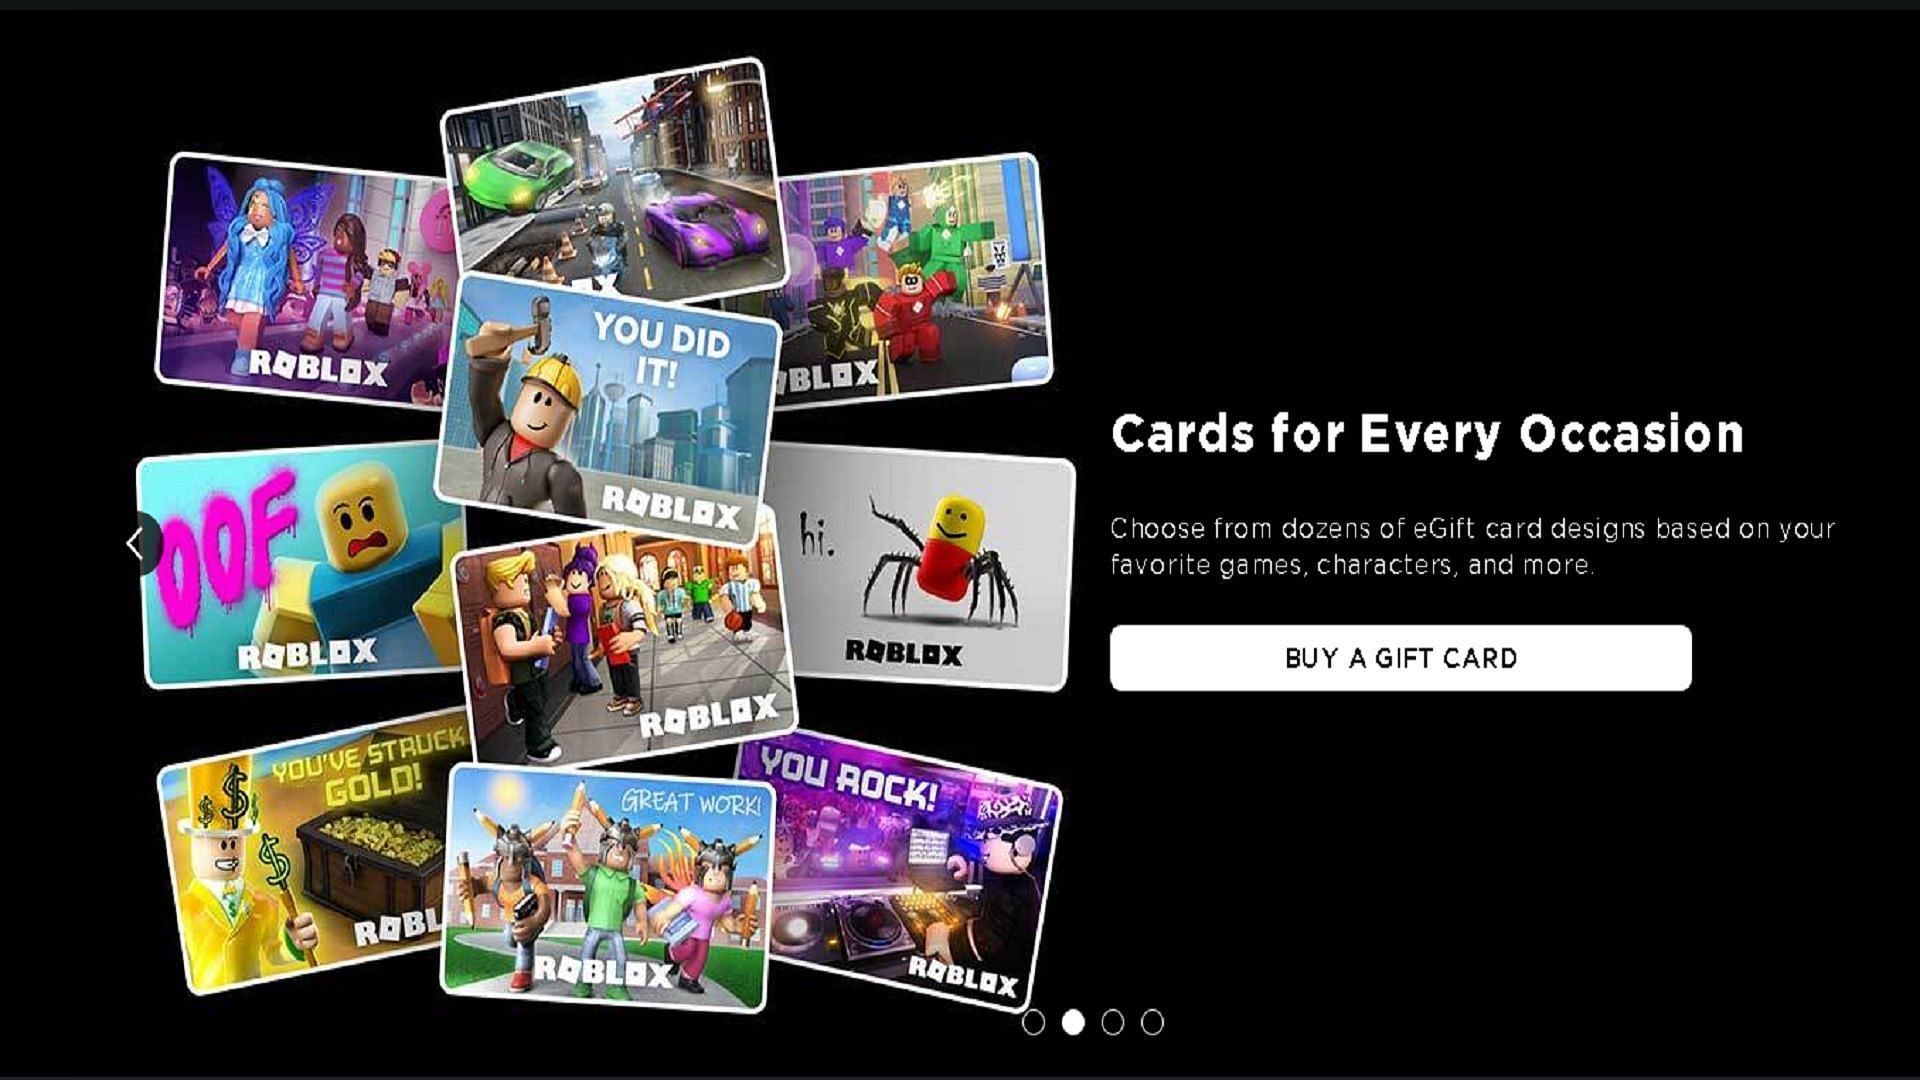 How to Redeem Roblox Gift Card